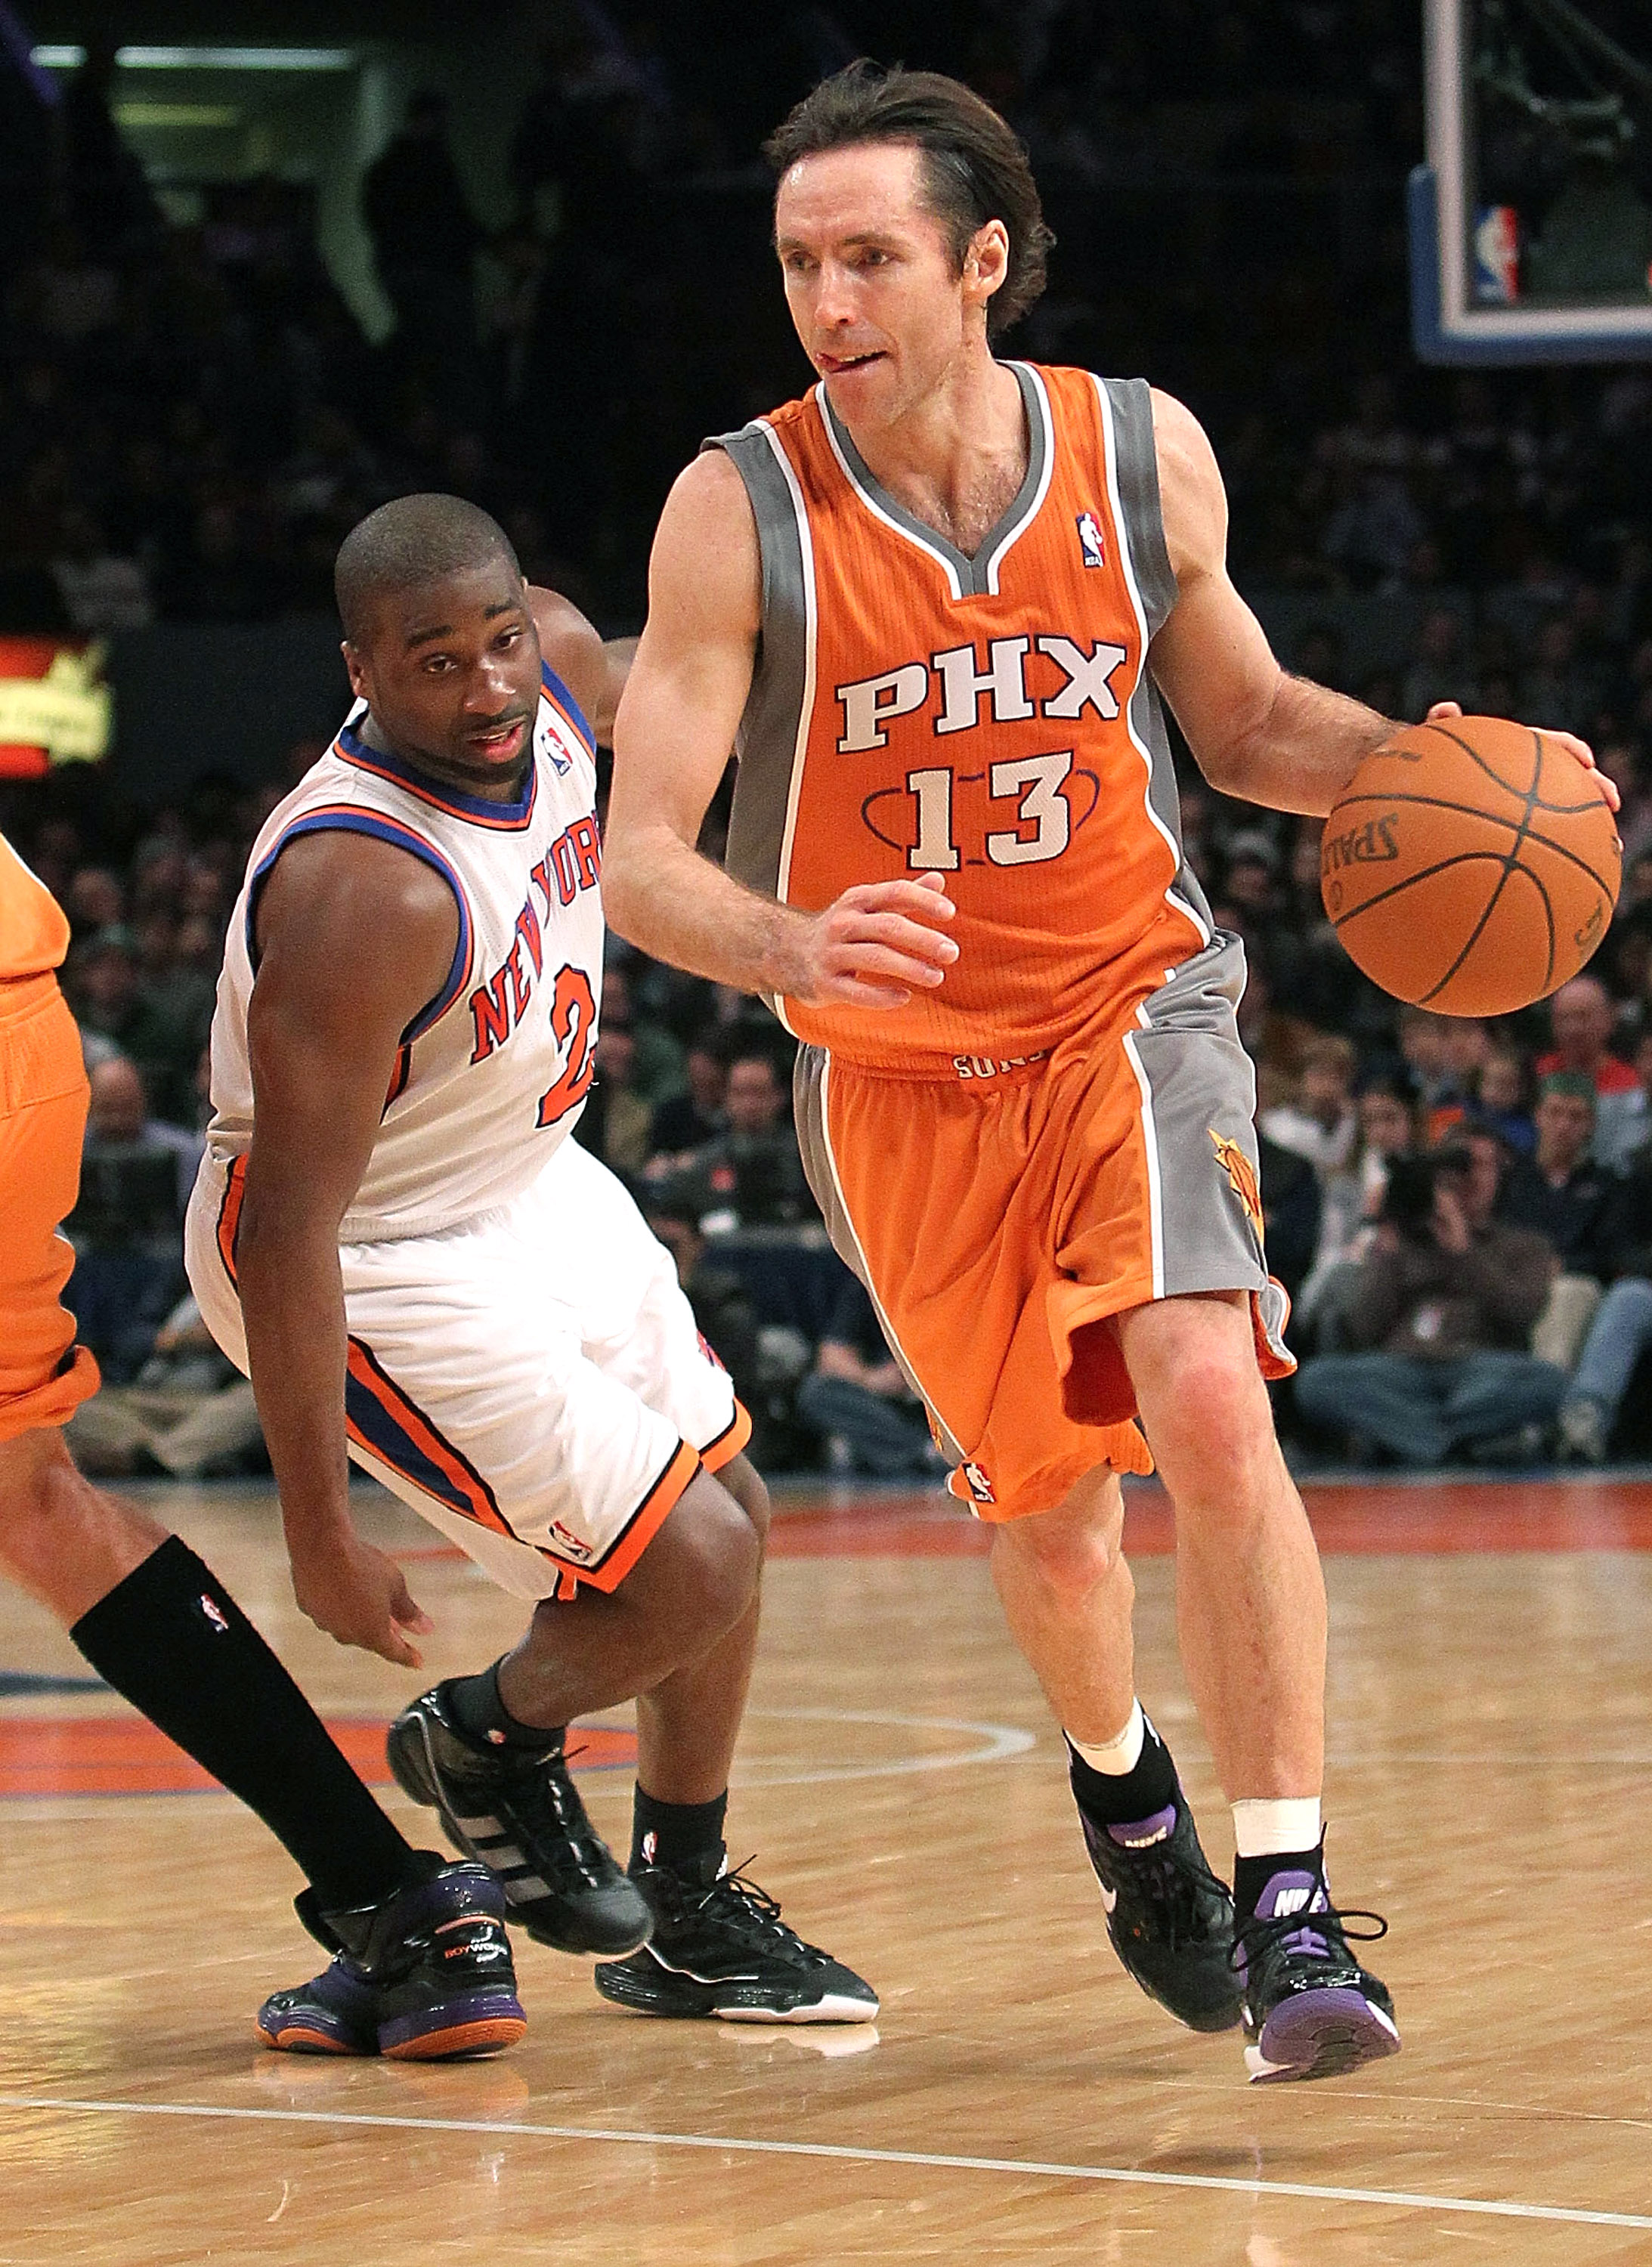 NEW YORK, NY - JANUARY 17:  Steve Nash #13 of the Phoenix Suns drives past Raymond Felton #2 of the New York Knicks at Madison Square Garden on January 17, 2011 in New York City. NOTE TO USER: User expressly acknowledges and agrees that, by downloading an